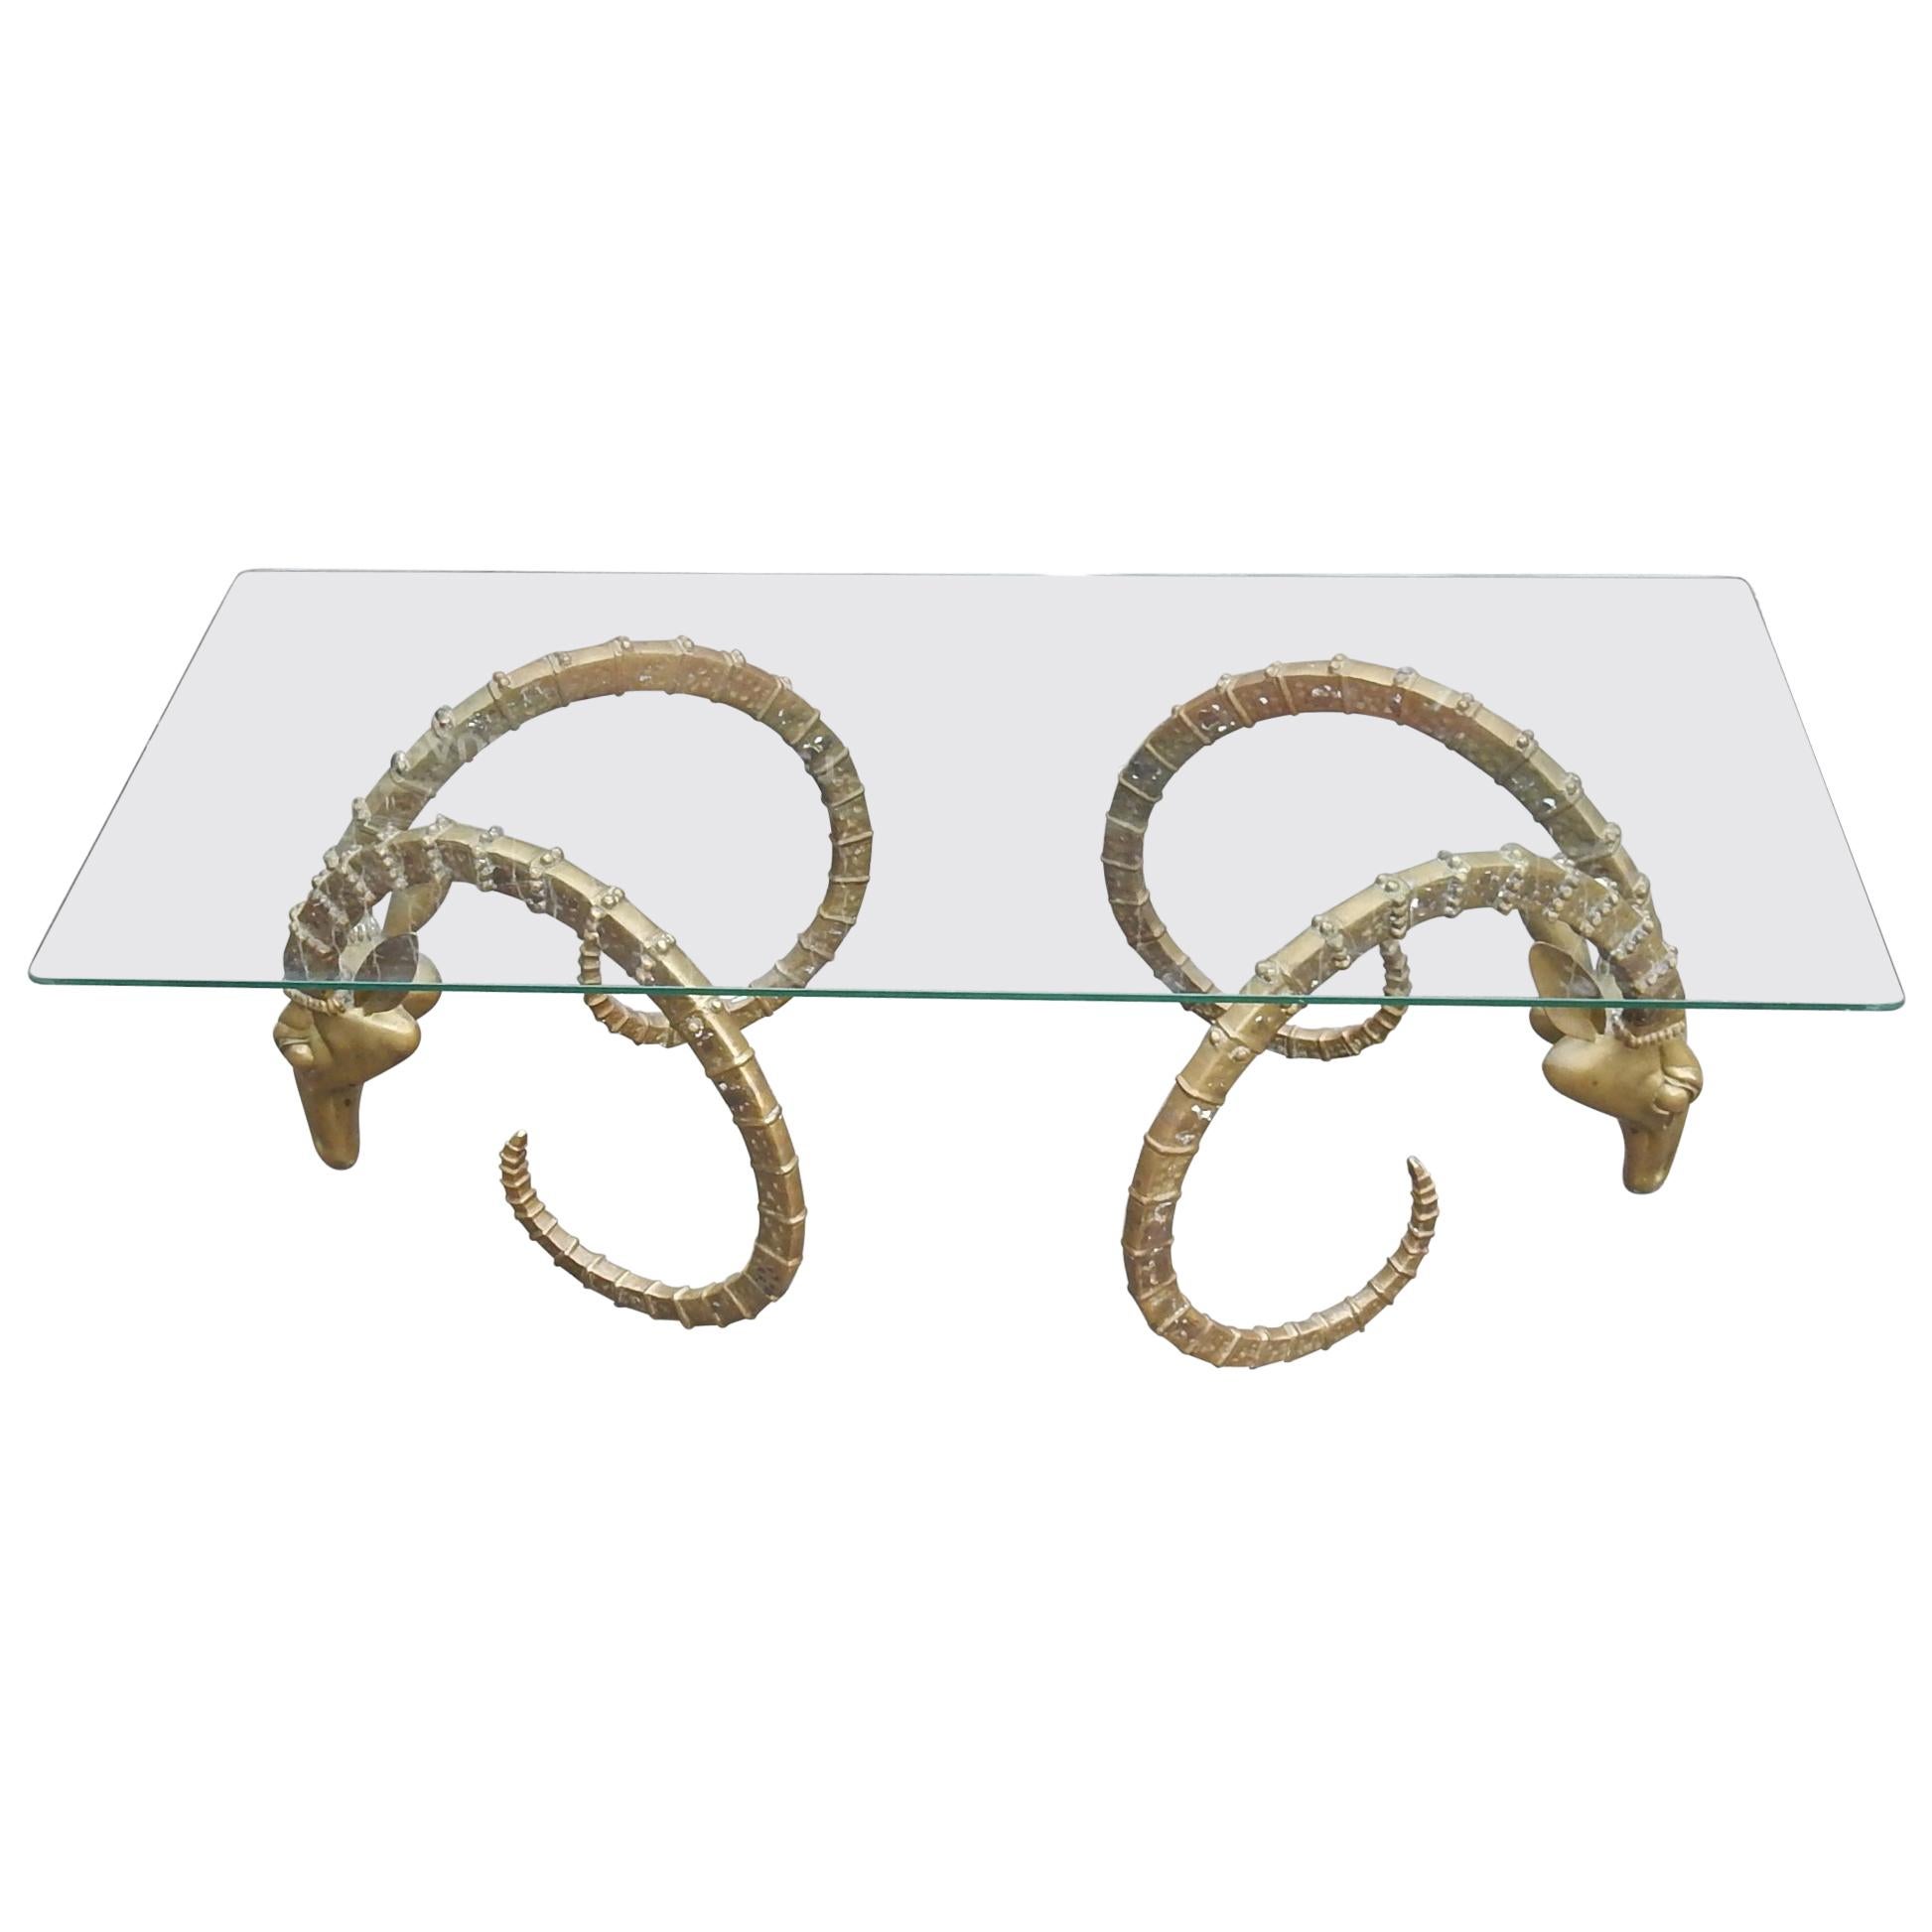 1970 Sculptural Ibex Heads Table Attributed to Alain Chervet